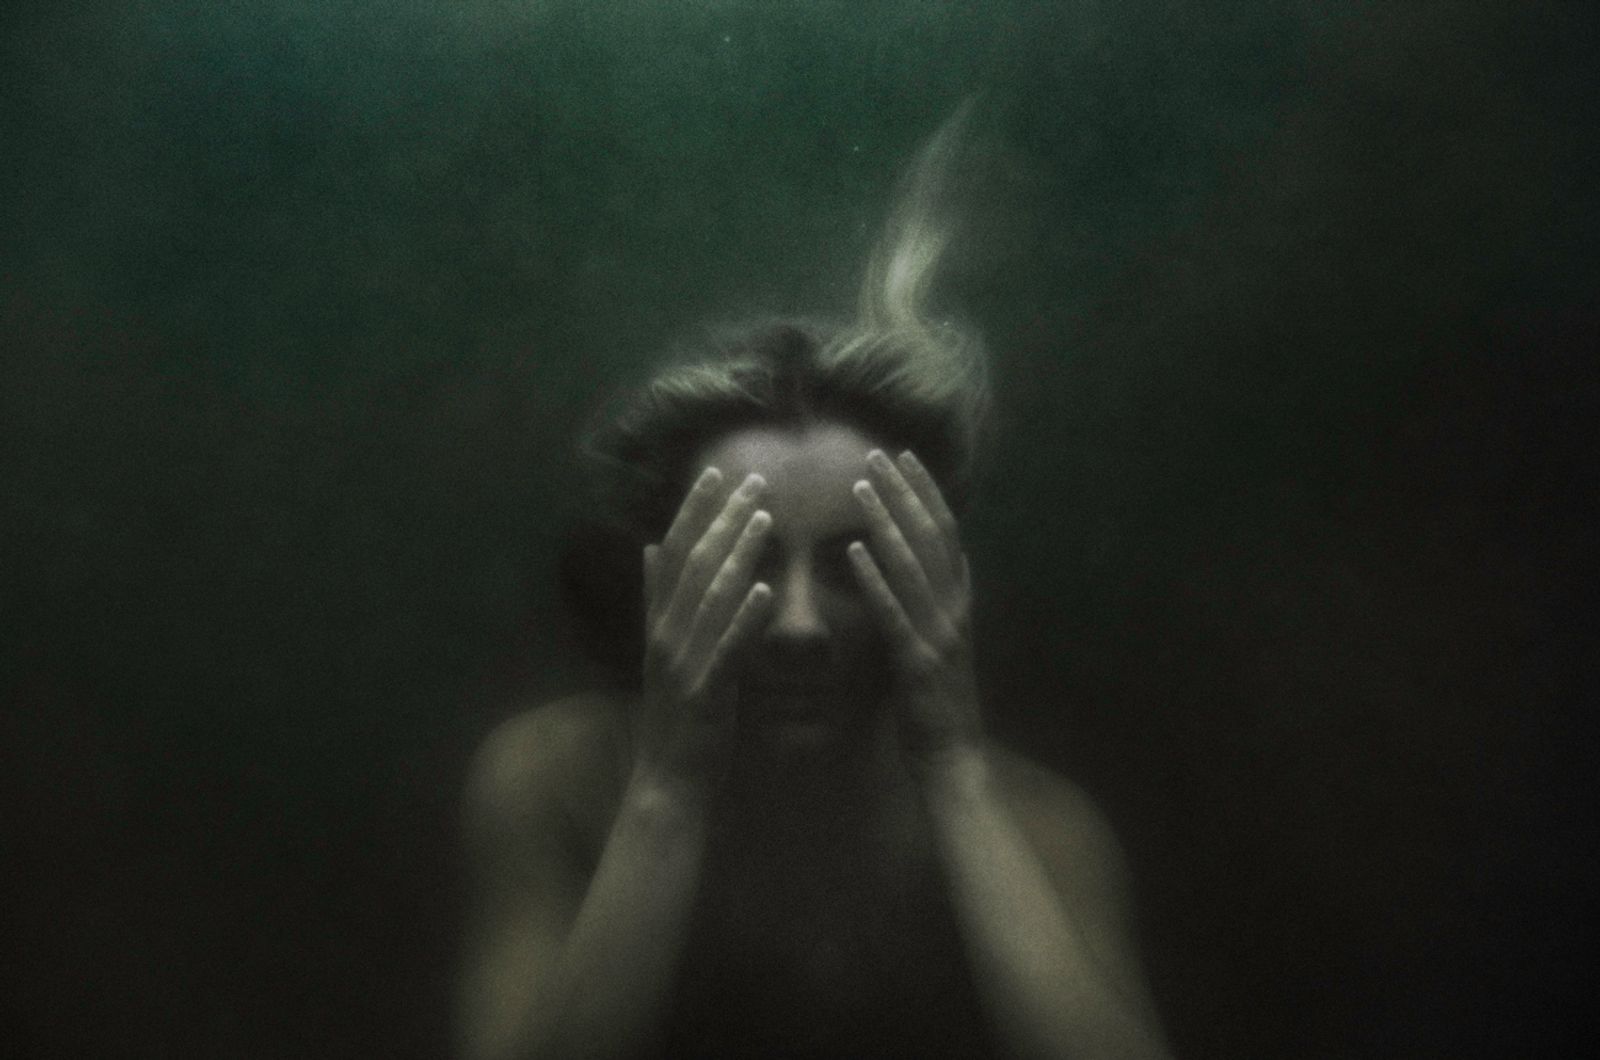 © Renee Revah - Image from the SILENCE photography project